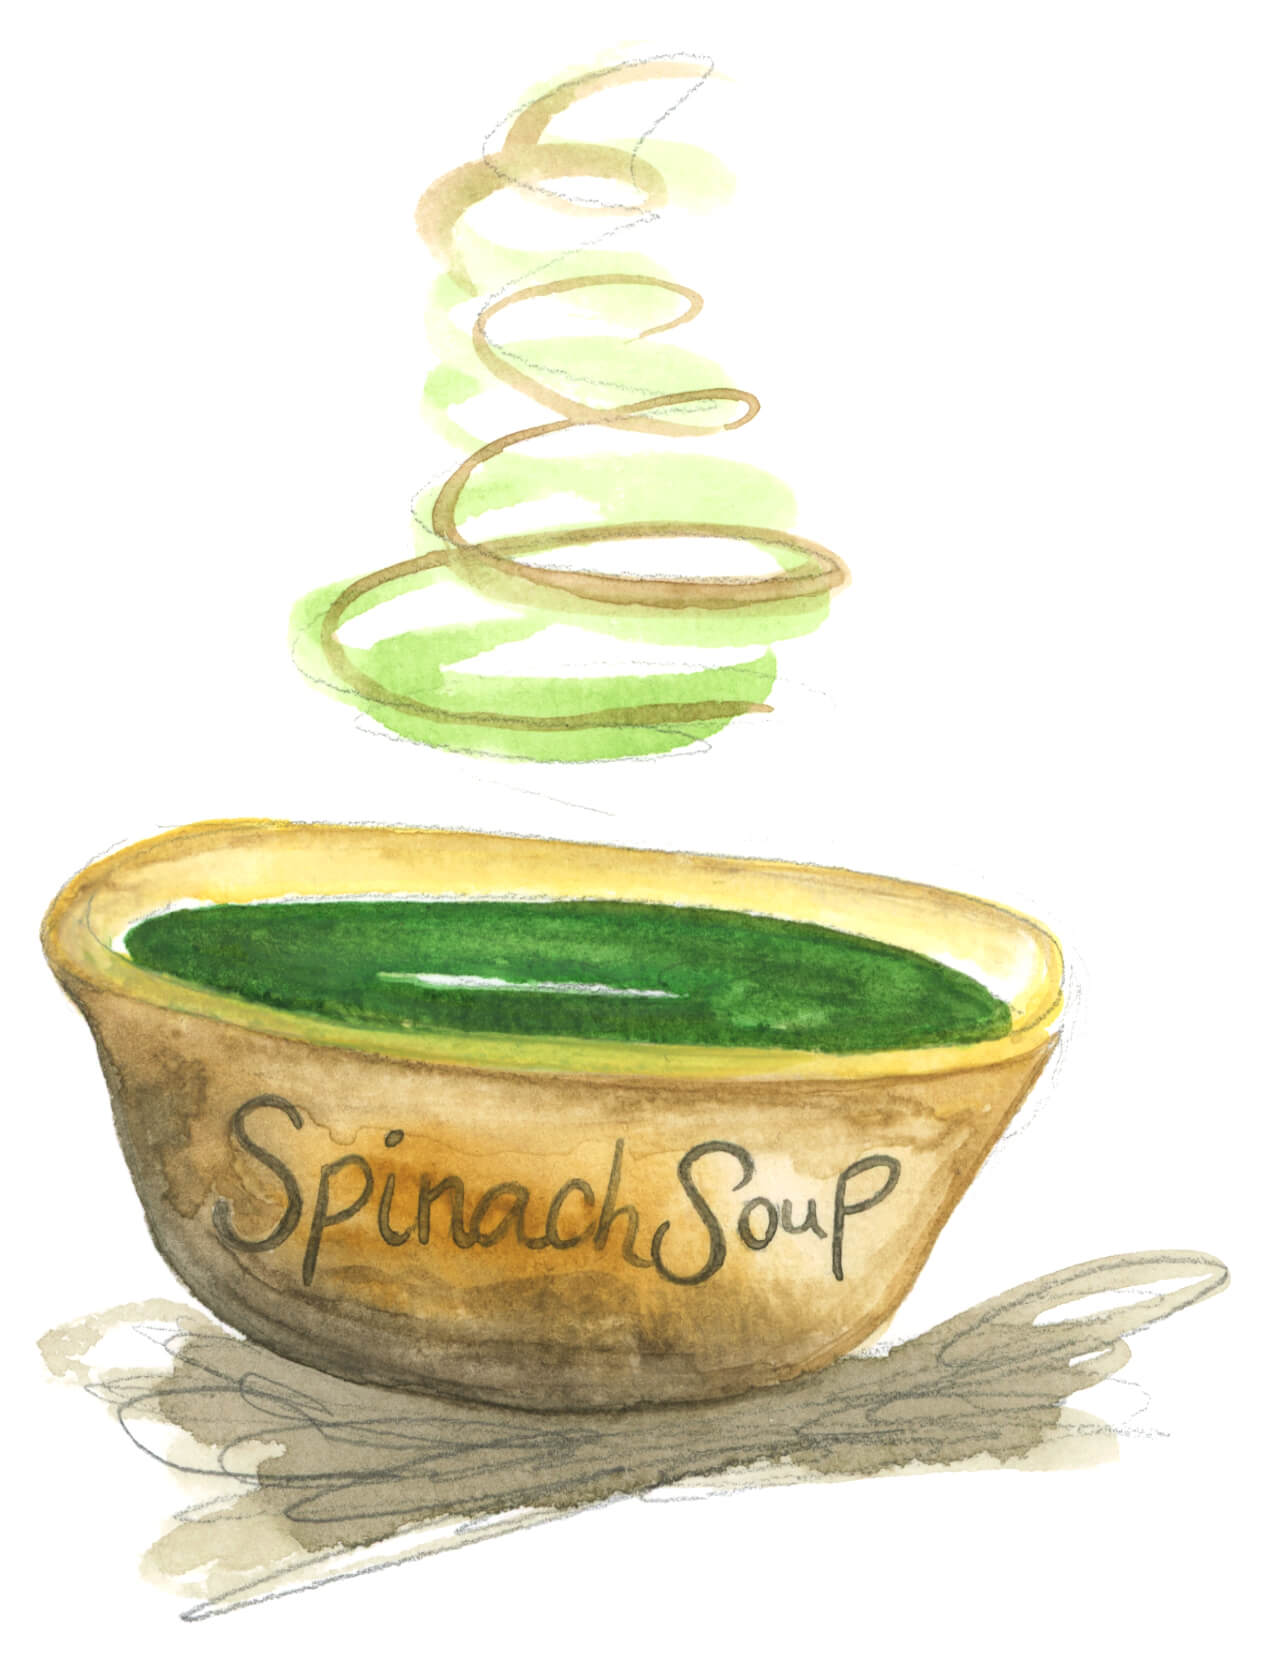 spinach soup for your soul during painful periods